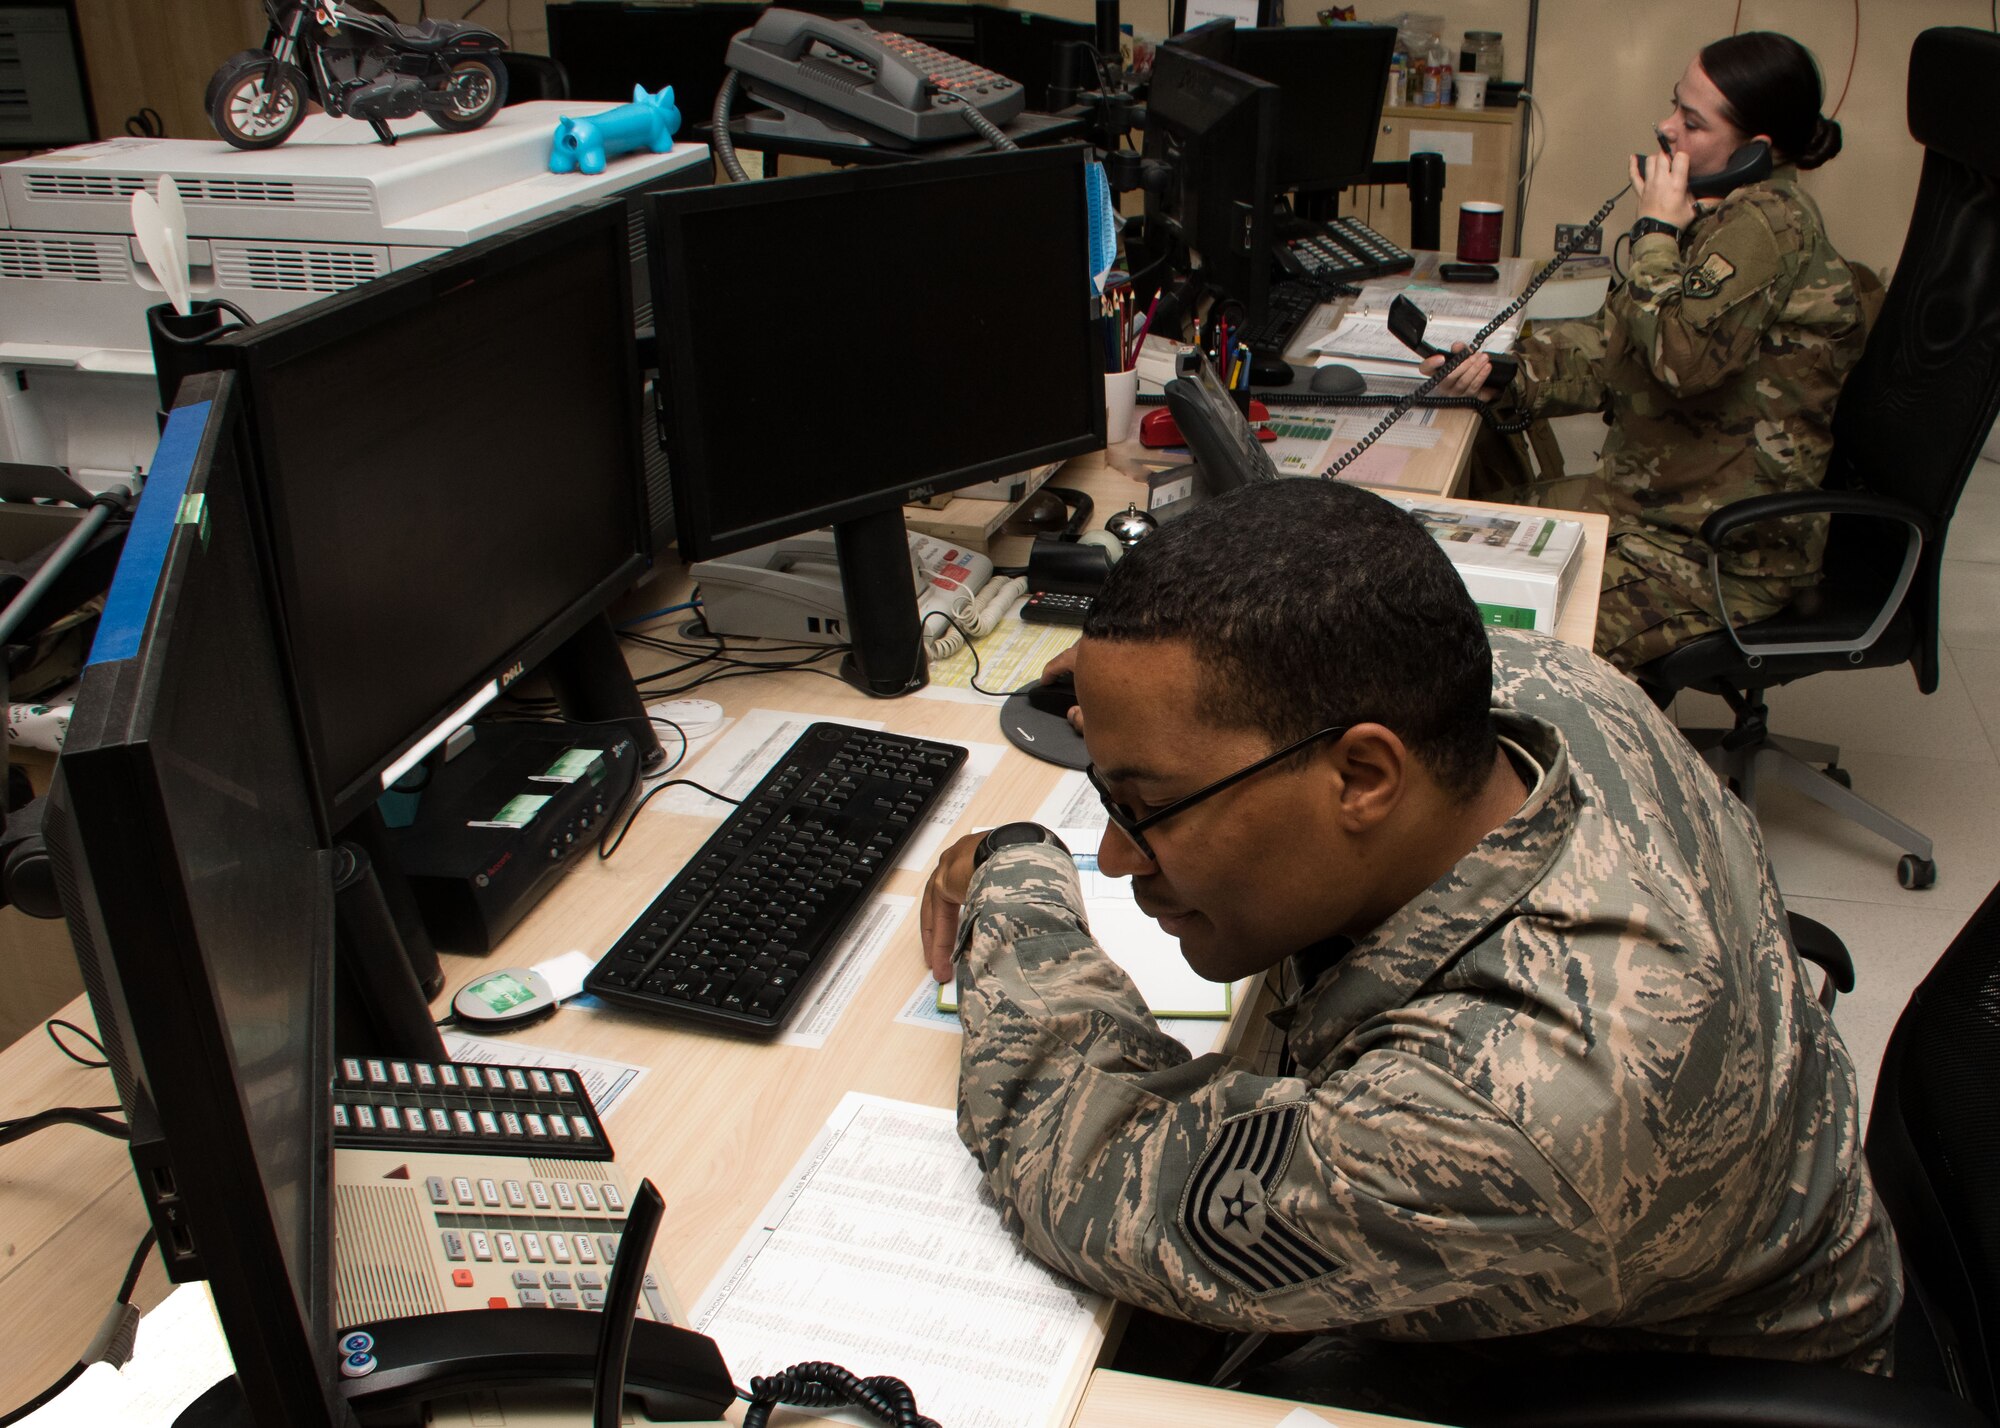 Tech. Sgt. Jeremy Barber, 386th Air Expeditionary Wing command and control systems NCO in charge, and Senior Airman Laurin Curtis, a 386th AEW emergency action controller, work at consoles in the command post March 15, 2017. Command post personnel are trained and certified to handle a vast array of situations, which can include monitoring flights and aircraft maintenance as well as passenger and cargo movement. (U.S. Air Force photo illustration/Senior Airman Andrew Park)  